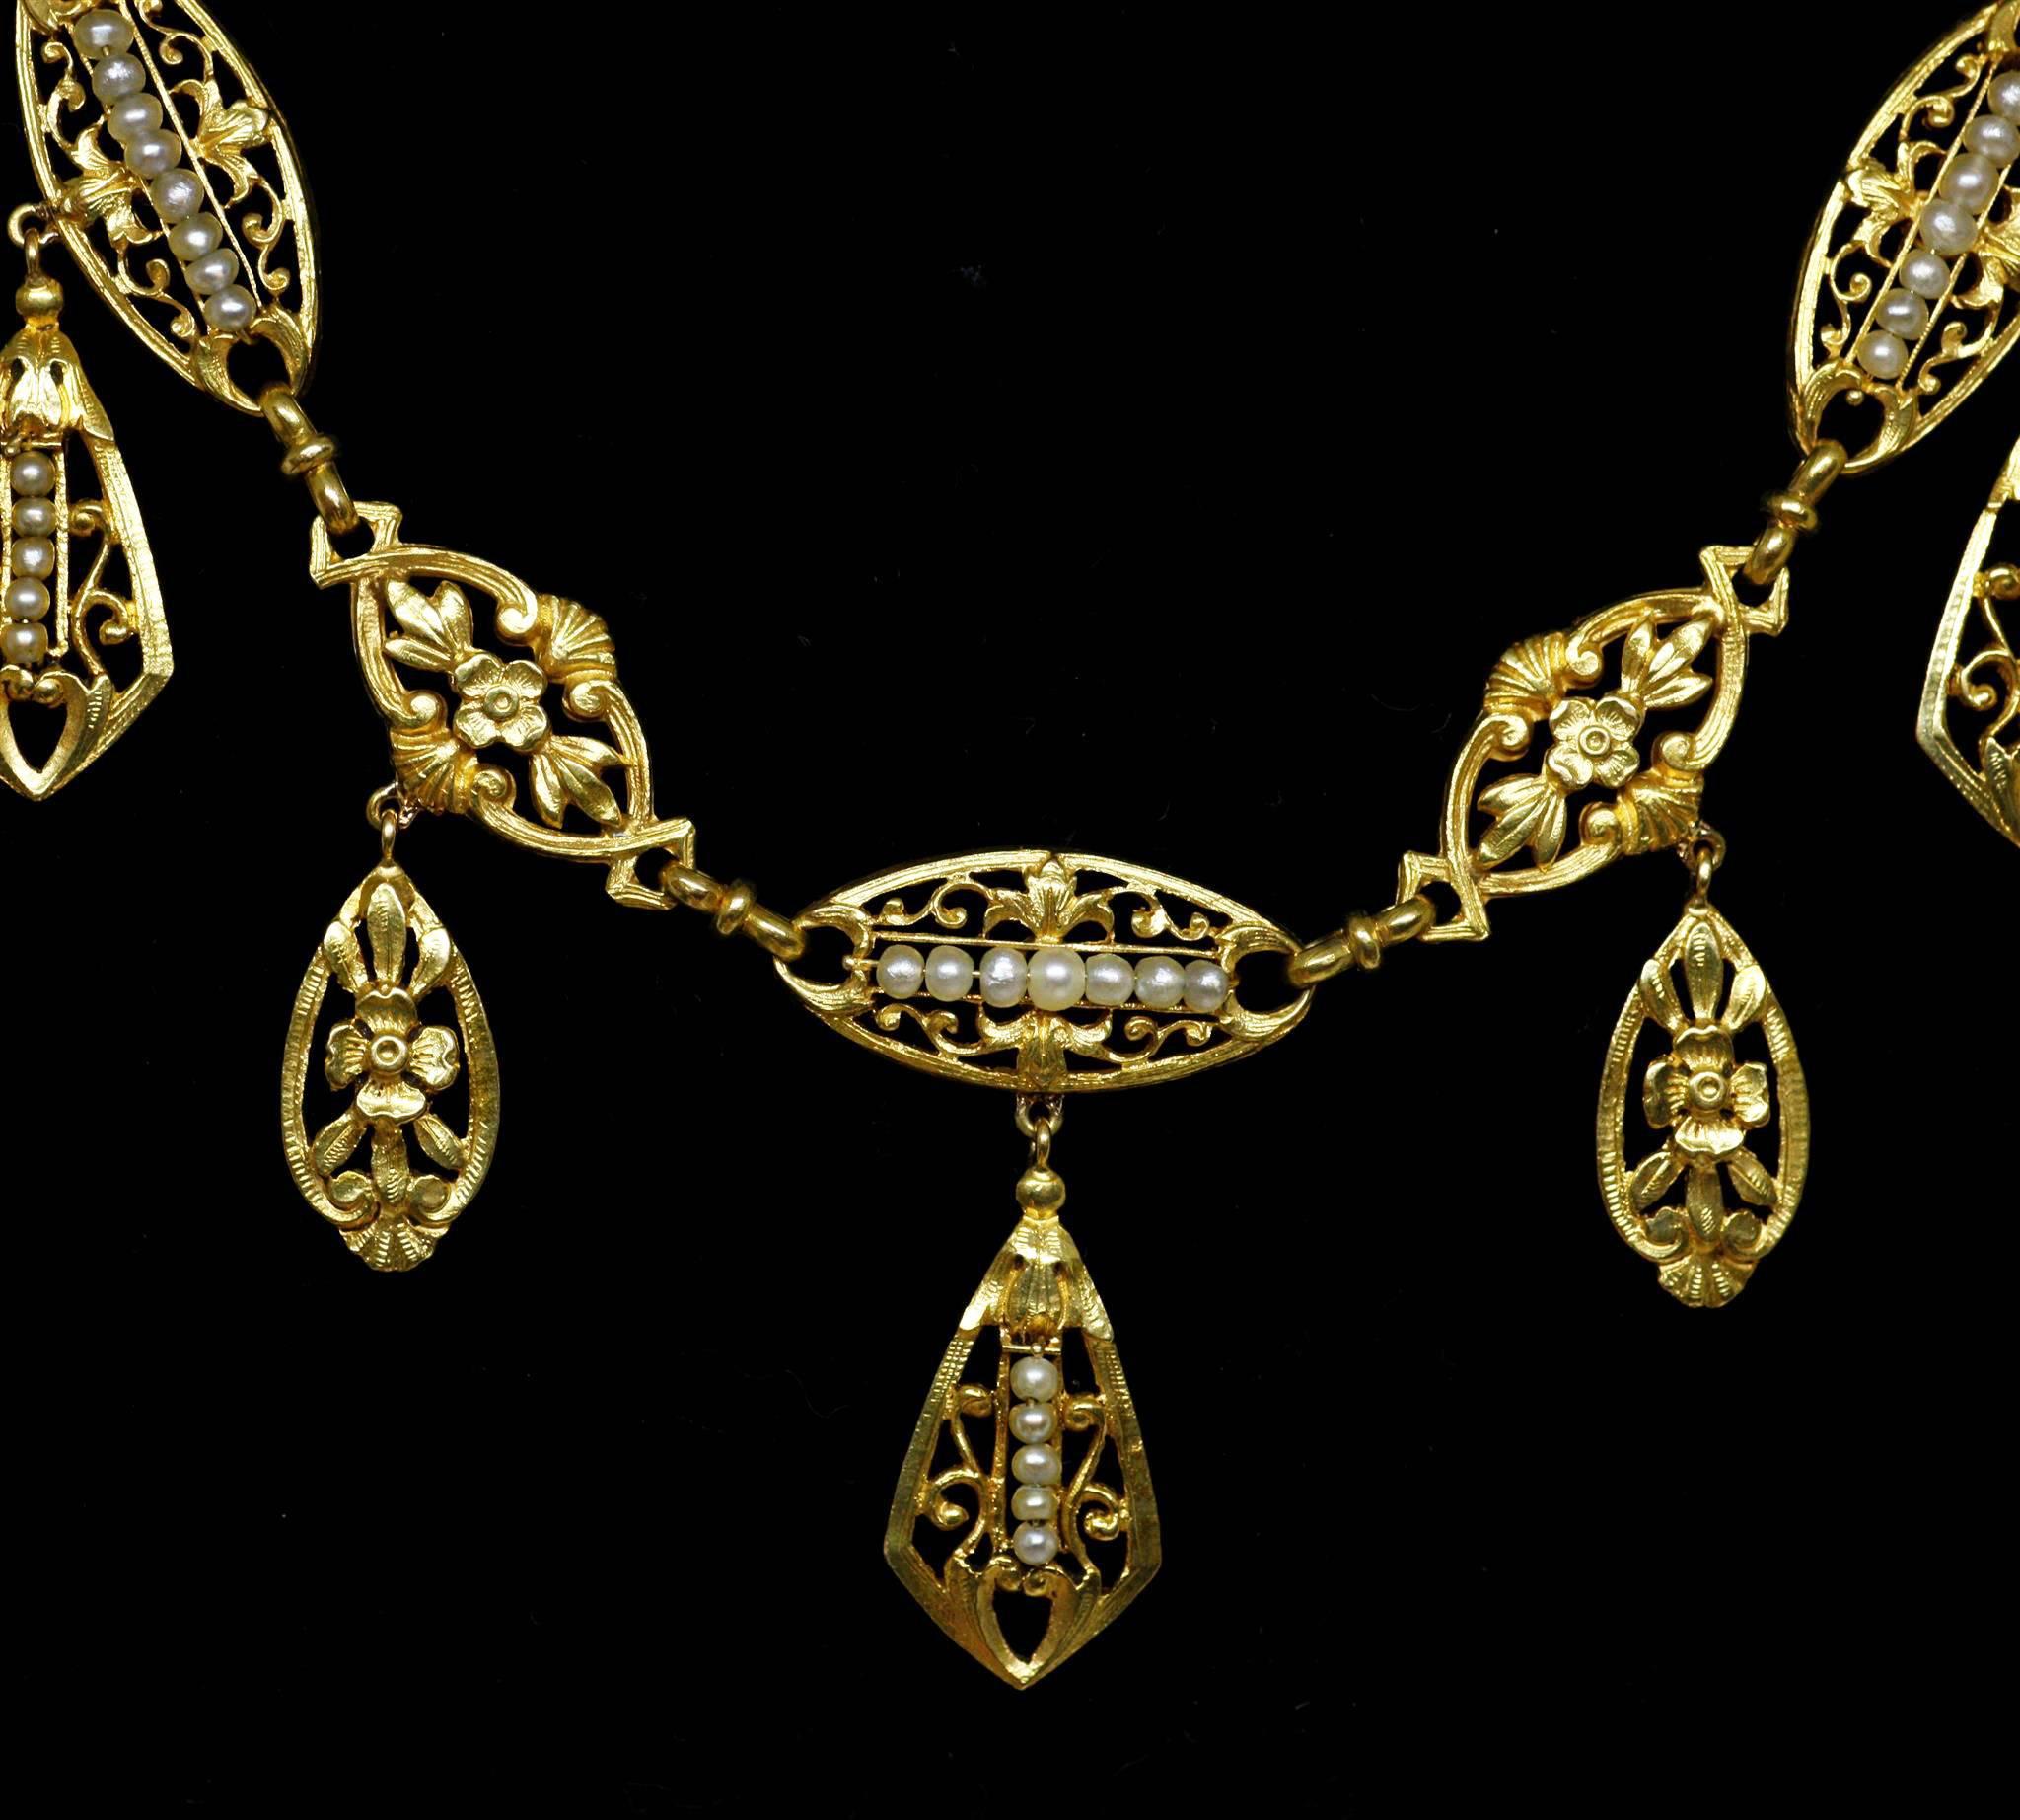 Antique yellow 18k gold necklace of a rare model with 7 pendants. Each link is decorated with a floral pattern and 6 of them are enhanced with small natural pearls. 
Perfect condition.
French (hallmark : eagle’s head), circa 1880

Length : 46 cms